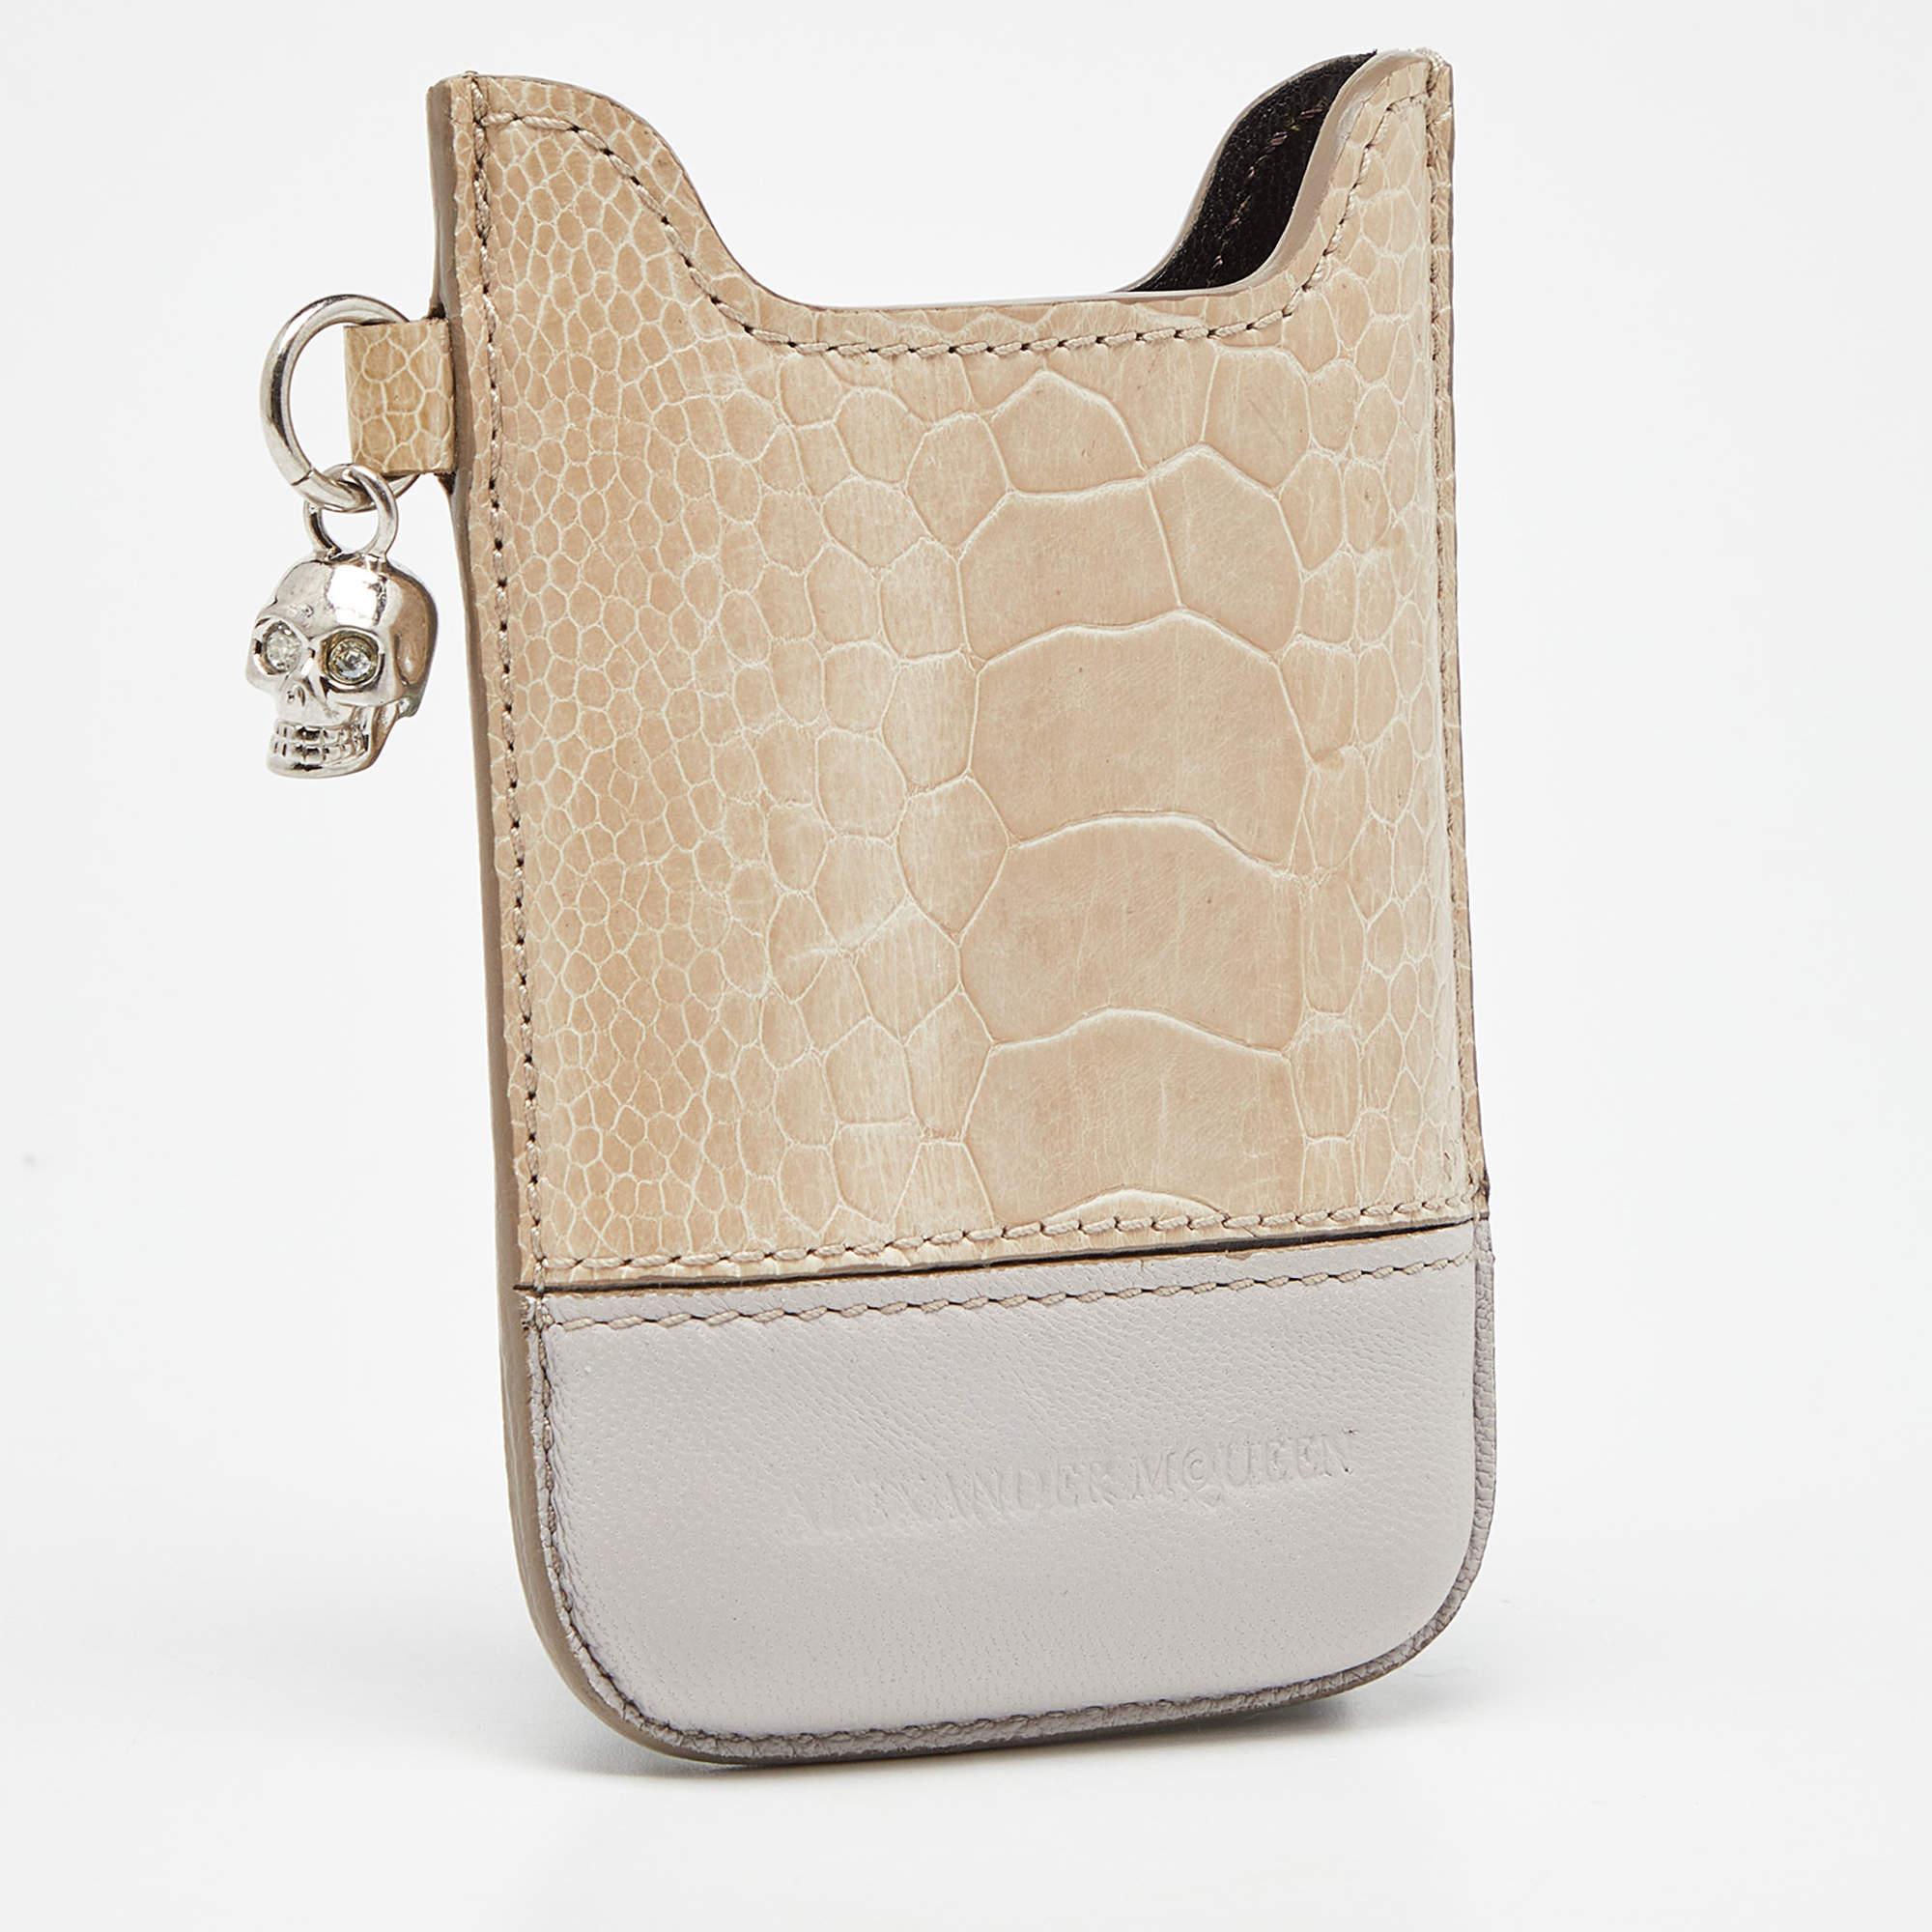 Alexander Mcqueen Beige Croc Embossed and Leather Phone Case For Sale 8